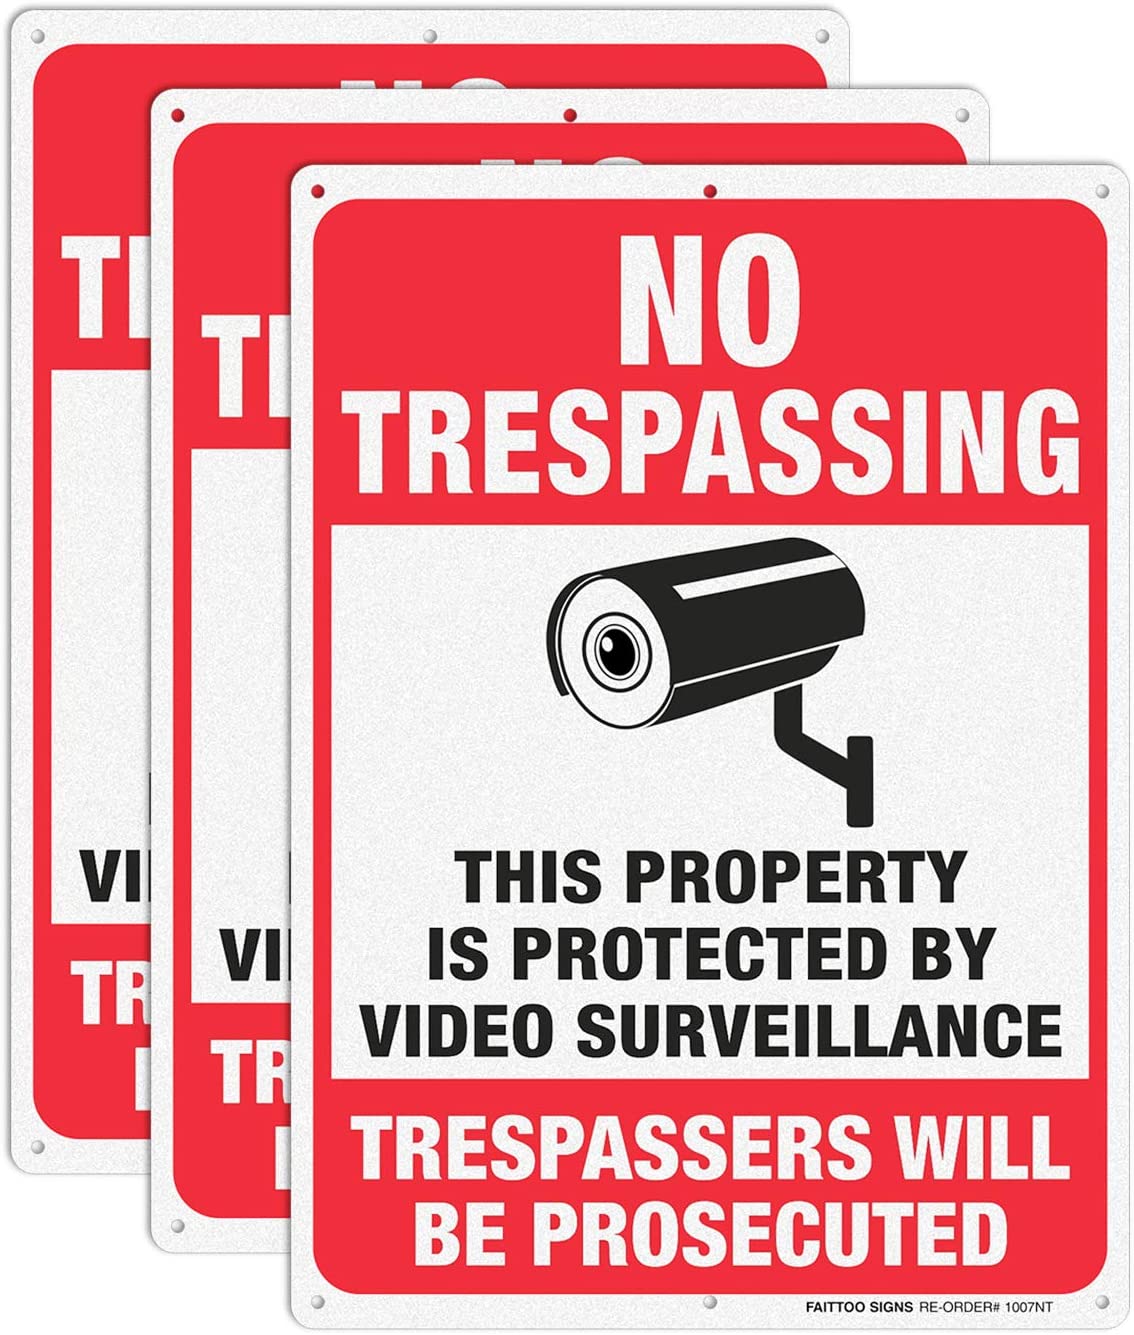 No Trespassing Sign,Trespassers Will Be Prosecuted Sign,Video Surveillance Sign,Warning Sign,10 x 7 Inches 0.40 Aluminum Reflective,Indoor Or Outdoor Use for Home/Business CCTV Security Camera